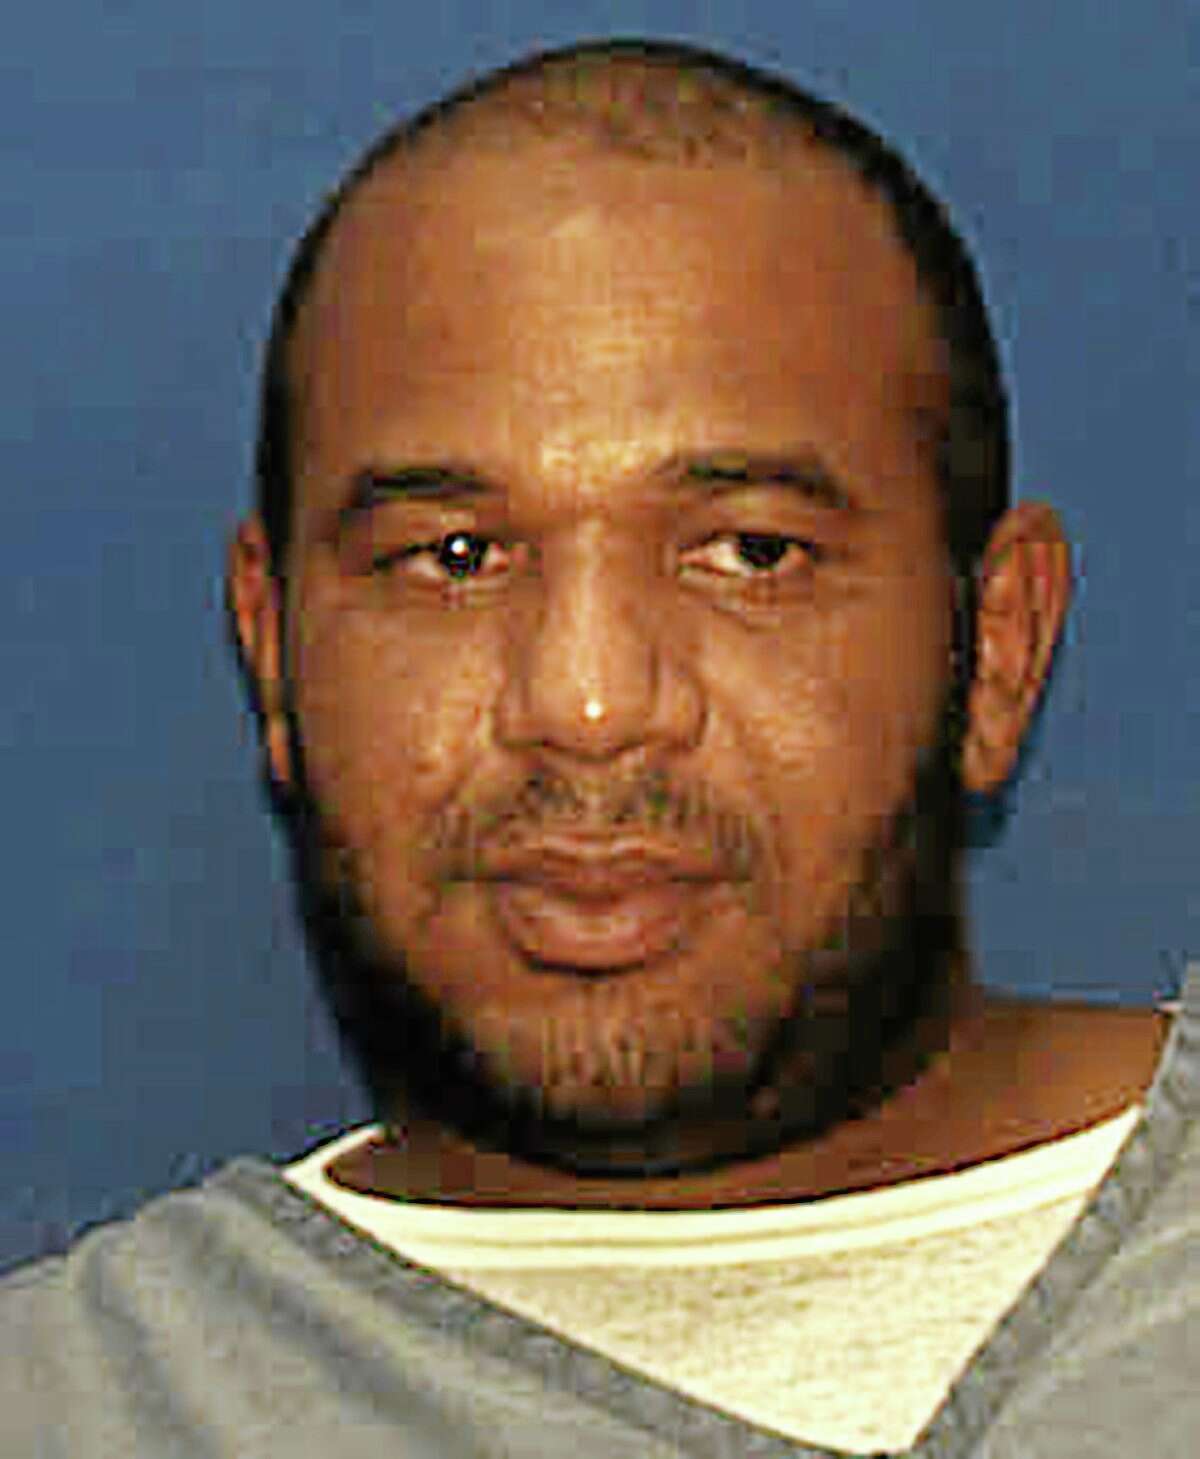 This undated photo provided by the Florida Department. of Corrections shows Joseph Jenkins. Jenkins and Charles Walker were mistakenly released from prison in Franklin County, Fla., in late September and early October. According to authorities, the the two convicted murderers were released with forged documents. A manhunt is under way for the two men. (AP Photo/Florida Department of Corrections)